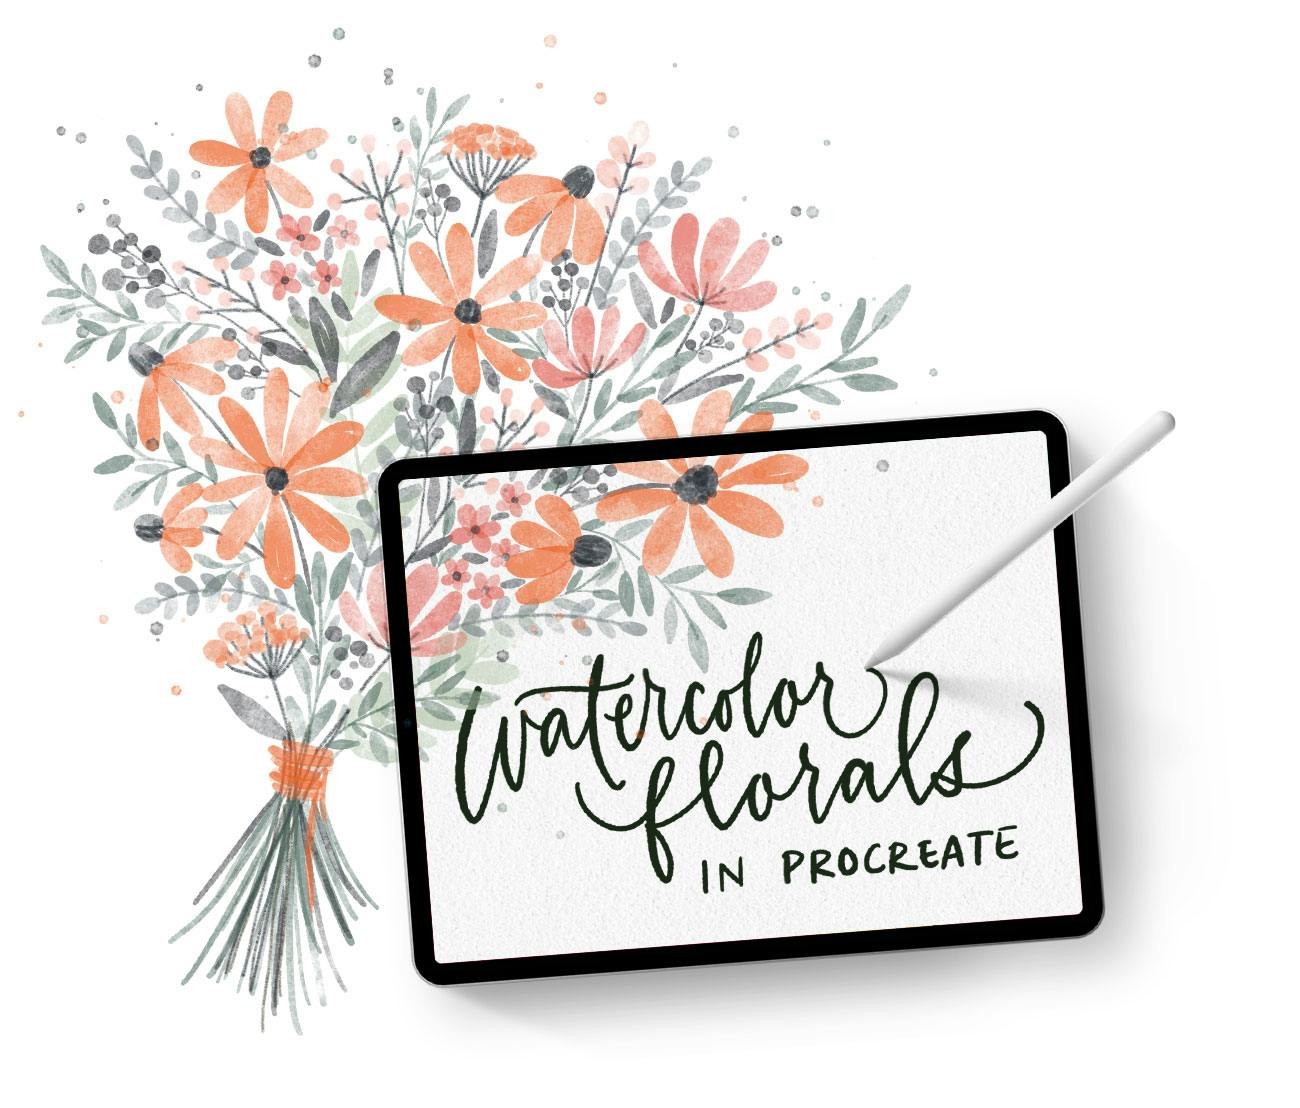 Learn how to digitally paint, vectorize and reuse watercolor florals in Procreate